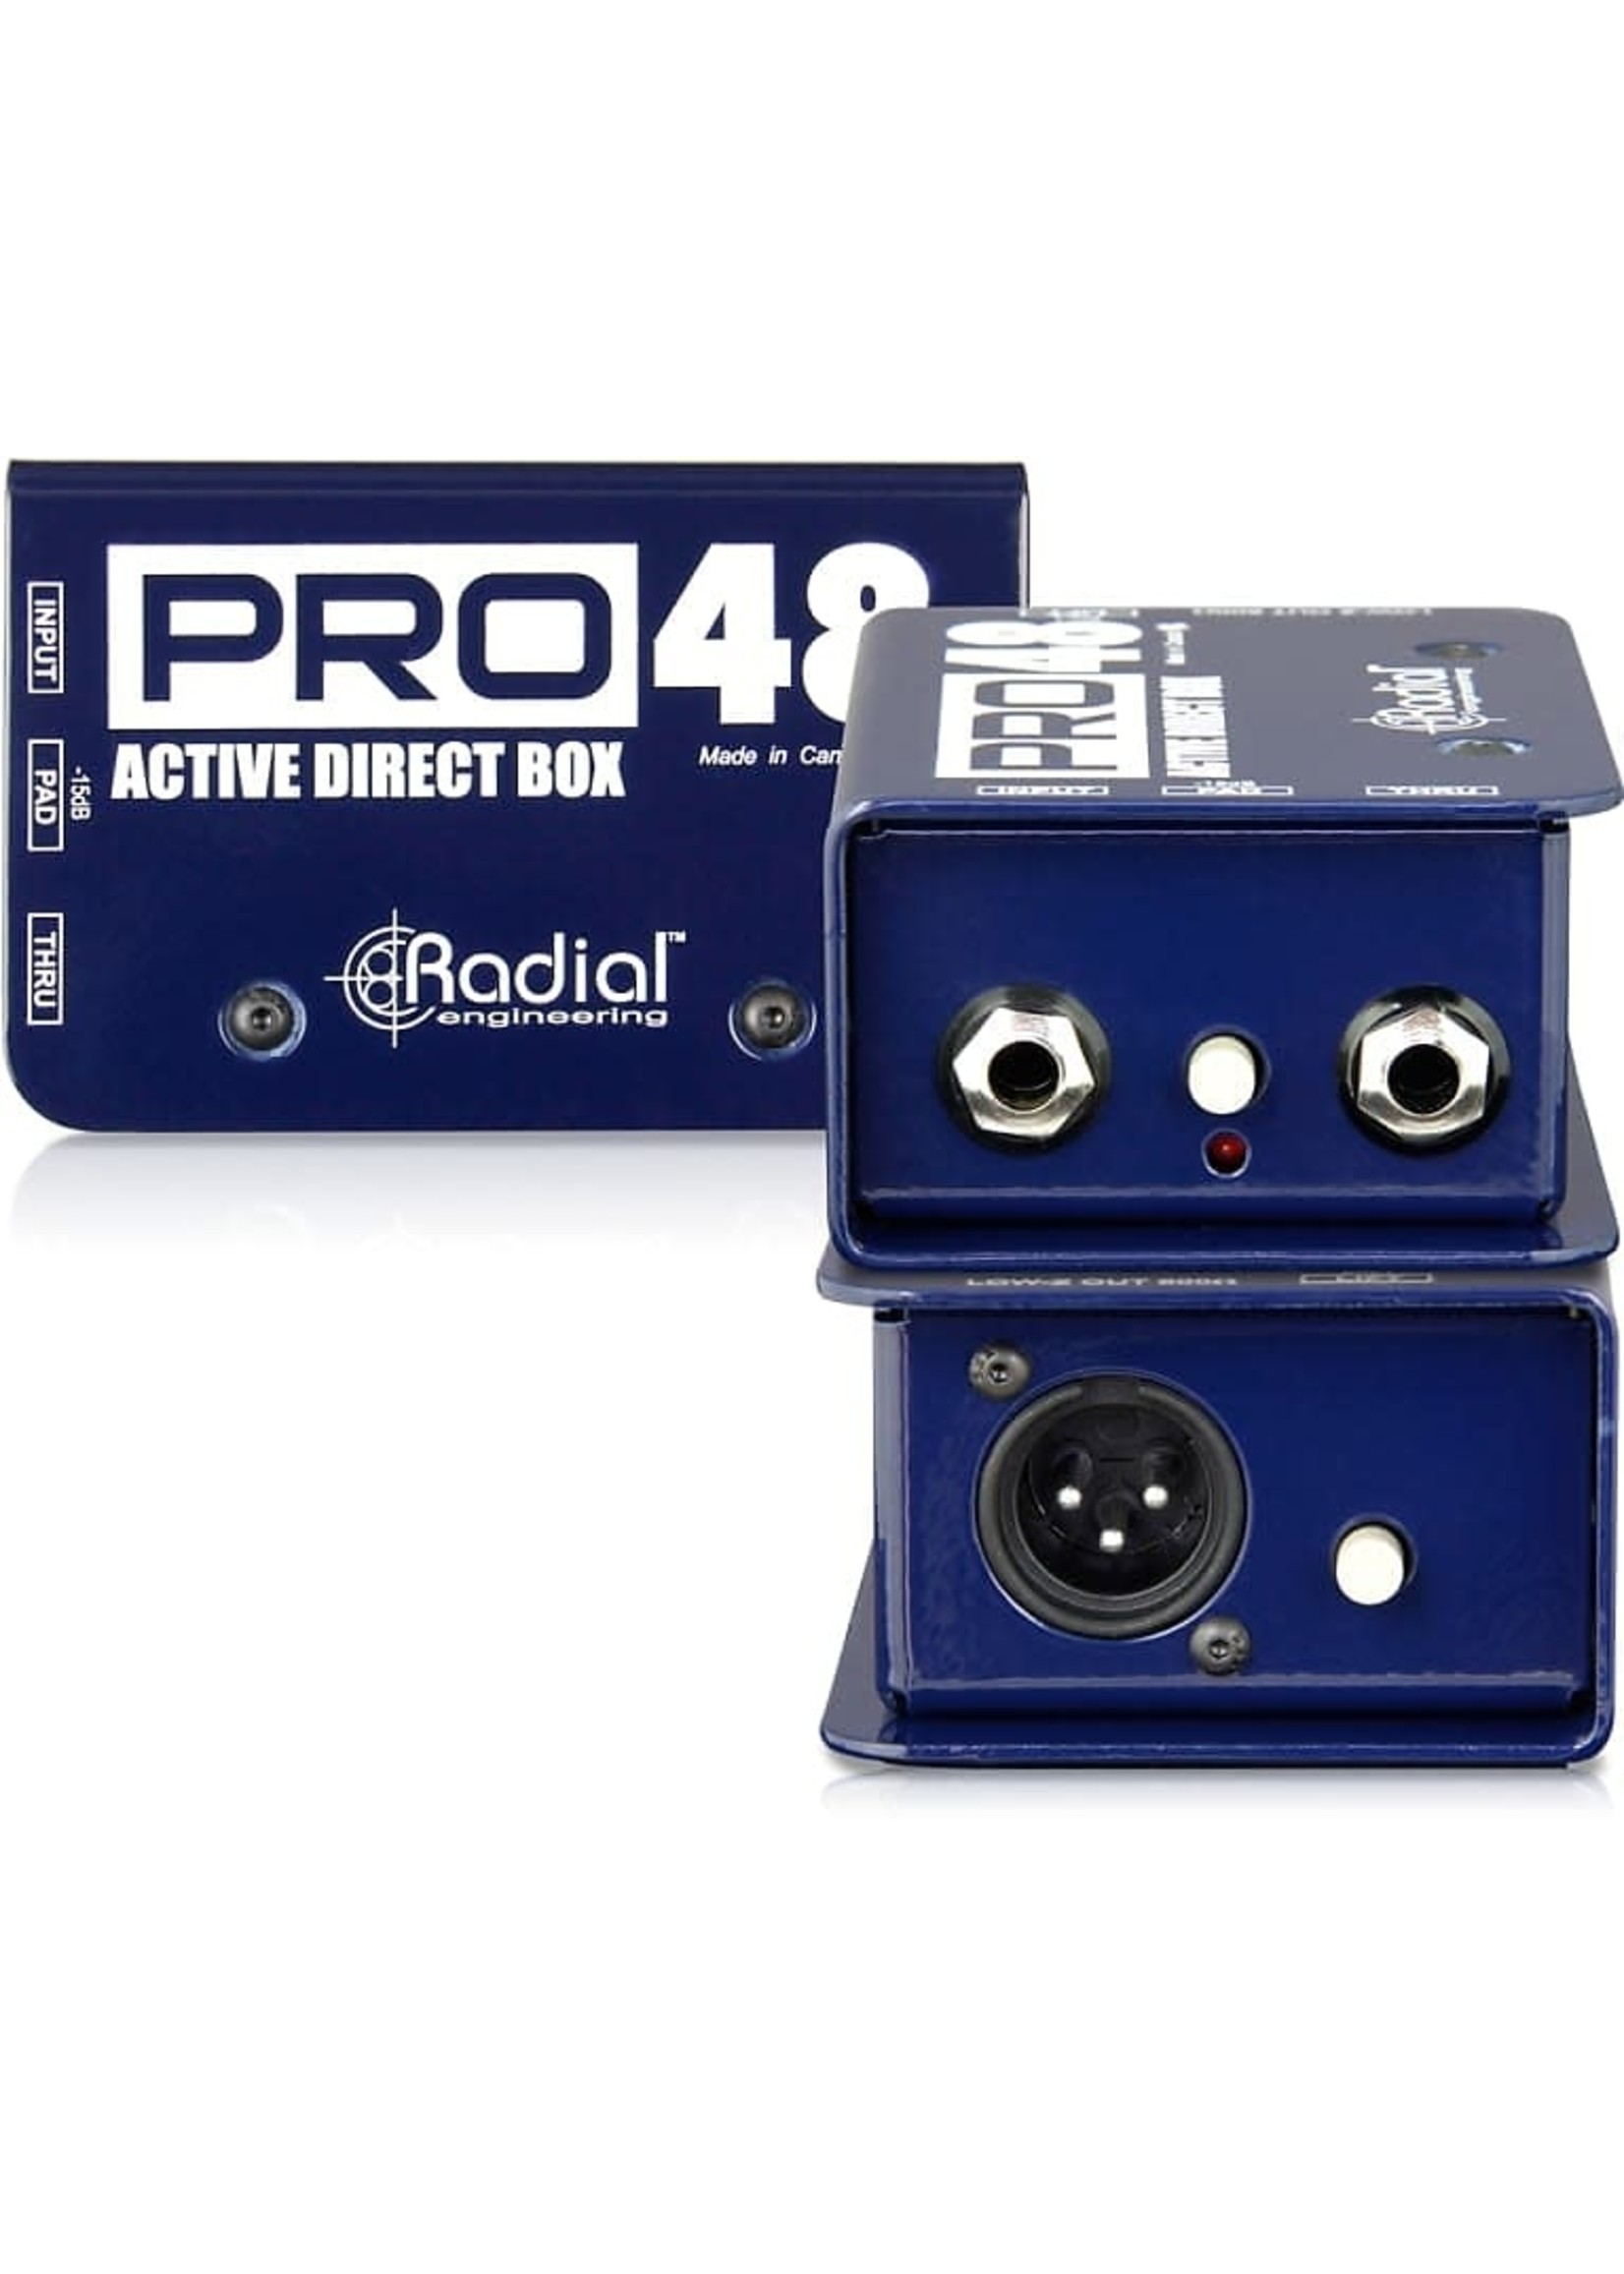 Radial engineering Radial Pro48 Active Direct Box